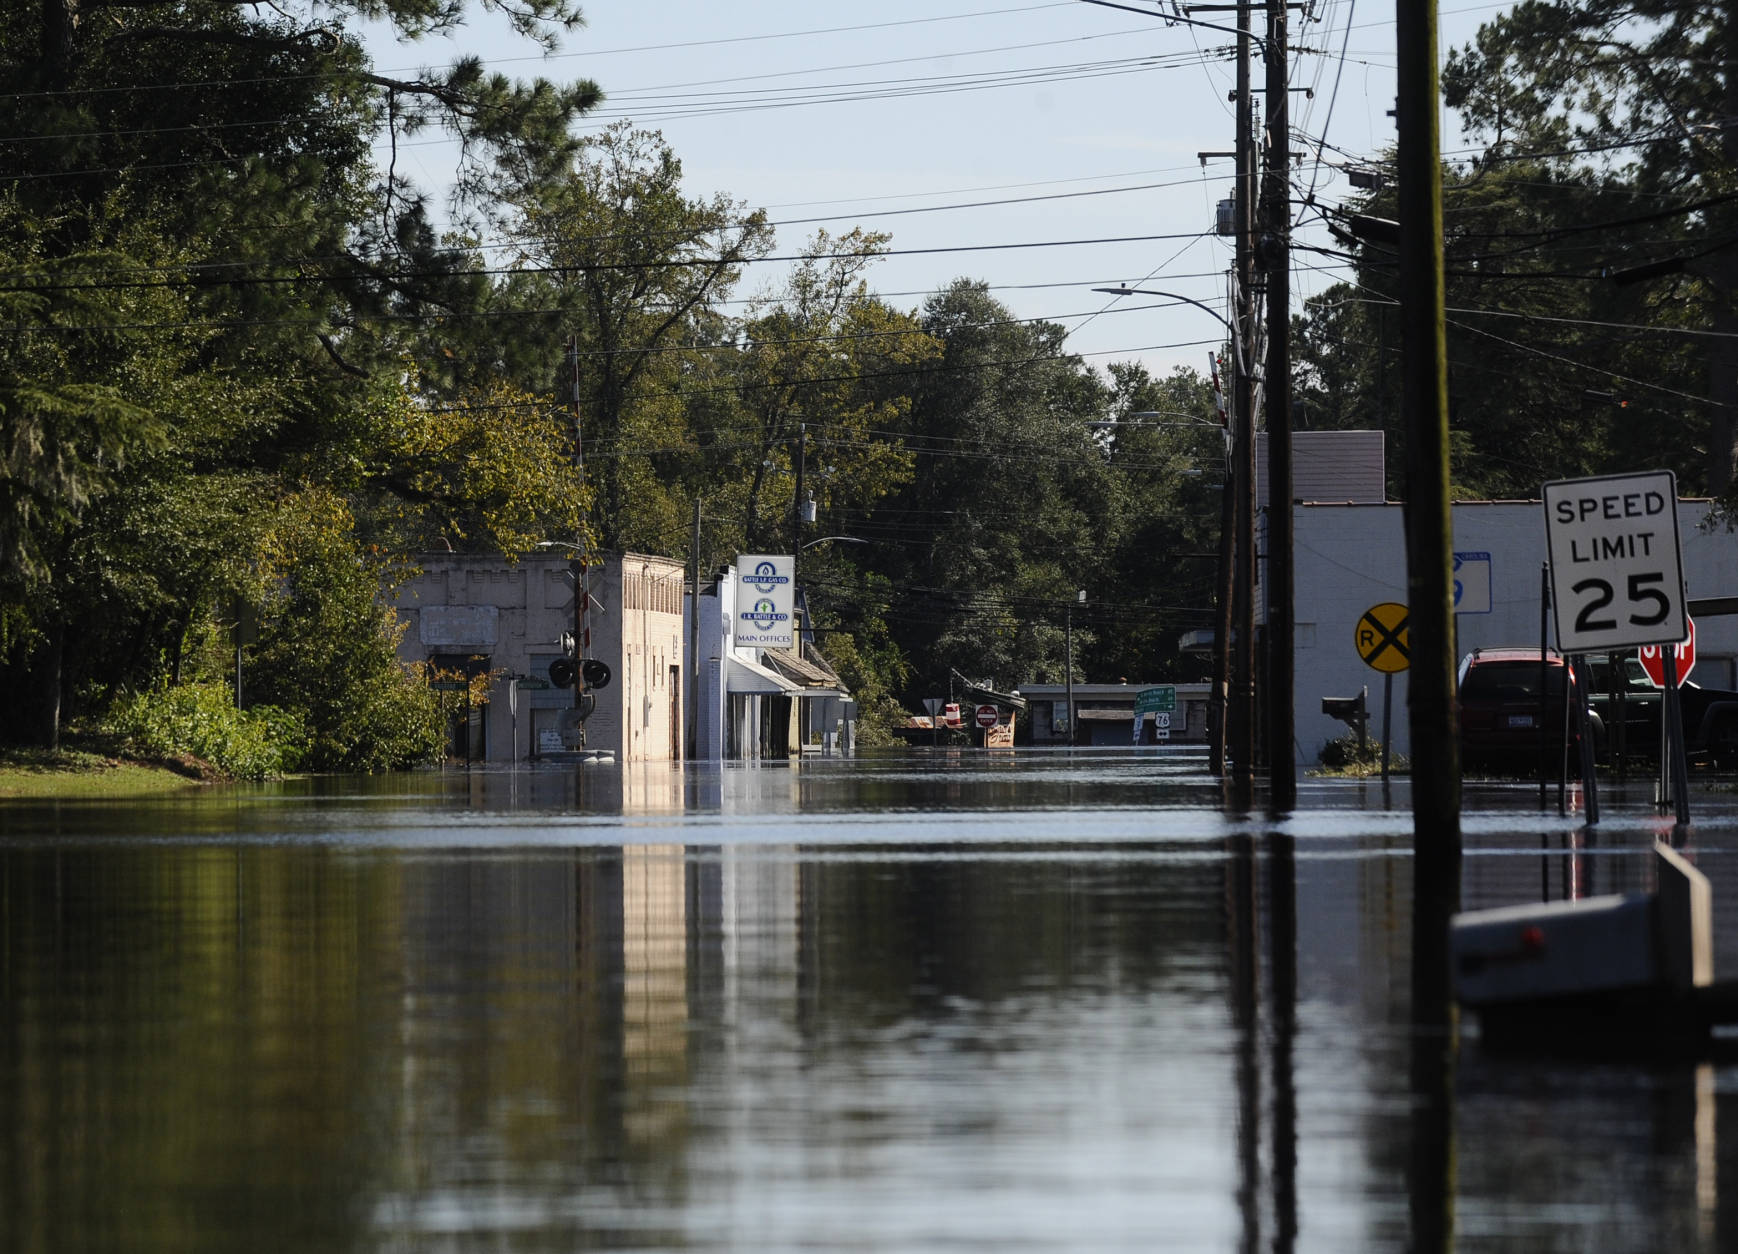 Downtown Nichols, S.C. is seen under floodwaters on Tuesday, Oct. 11, 2016. About 150 people were rescued by boats from flooding in the riverside village of Nichols on Monday. (AP Photo/Rainier Ehrhardt)